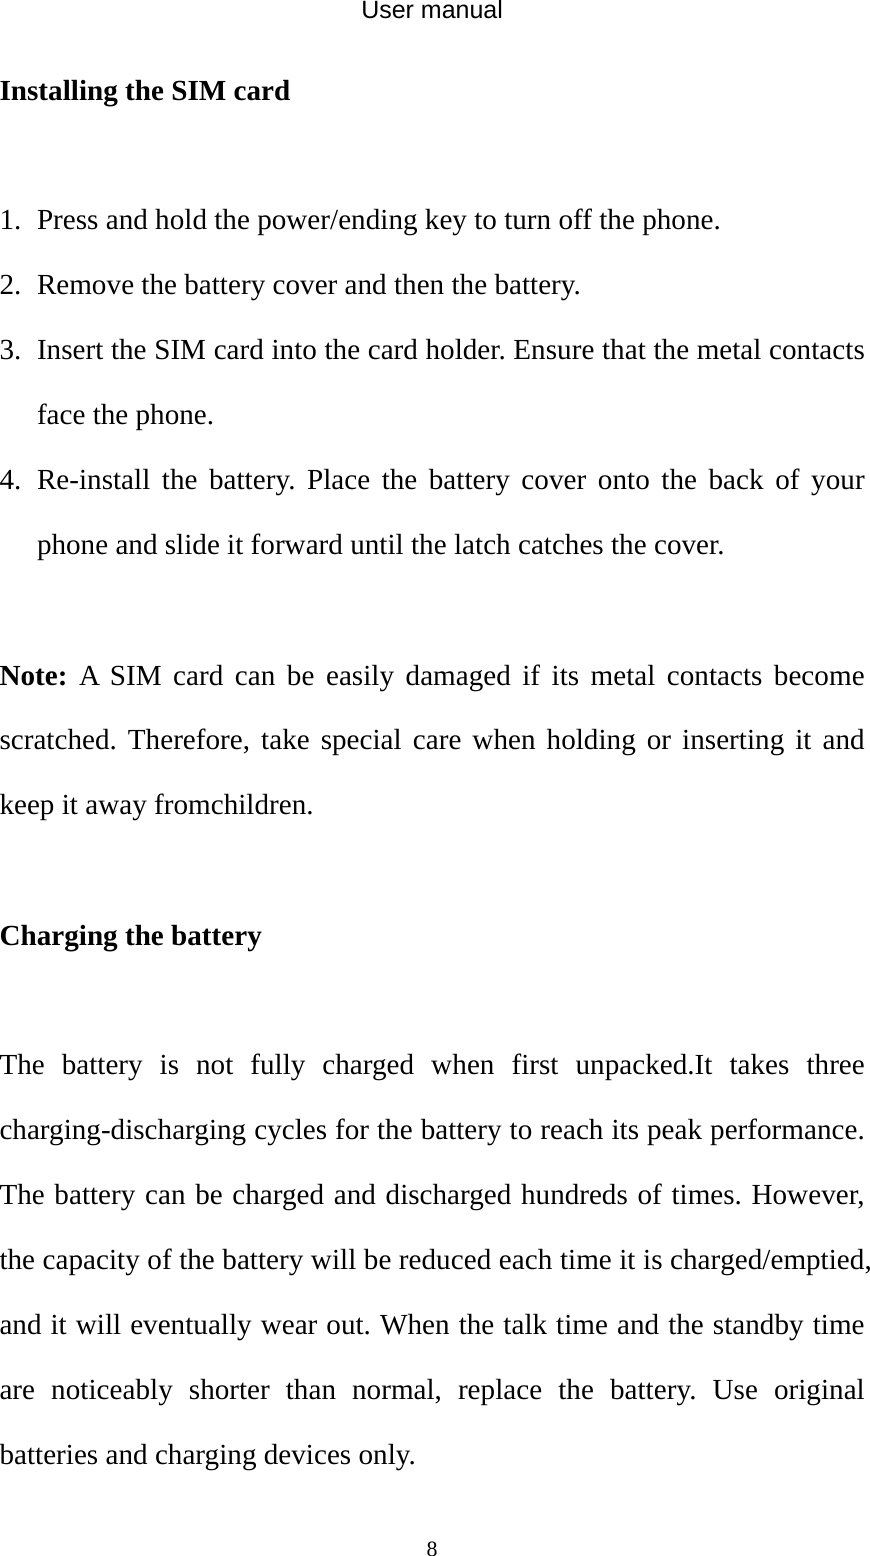 User manual  8Installing the SIM card  1. Press and hold the power/ending key to turn off the phone. 2. Remove the battery cover and then the battery. 3. Insert the SIM card into the card holder. Ensure that the metal contacts face the phone. 4. Re-install the battery. Place the battery cover onto the back of your phone and slide it forward until the latch catches the cover.  Note: A SIM card can be easily damaged if its metal contacts become scratched. Therefore, take special care when holding or inserting it and keep it away fromchildren.  Charging the battery  The battery is not fully charged when first unpacked.It takes three charging-discharging cycles for the battery to reach its peak performance. The battery can be charged and discharged hundreds of times. However, the capacity of the battery will be reduced each time it is charged/emptied, and it will eventually wear out. When the talk time and the standby time are noticeably shorter than normal, replace the battery. Use original batteries and charging devices only. 